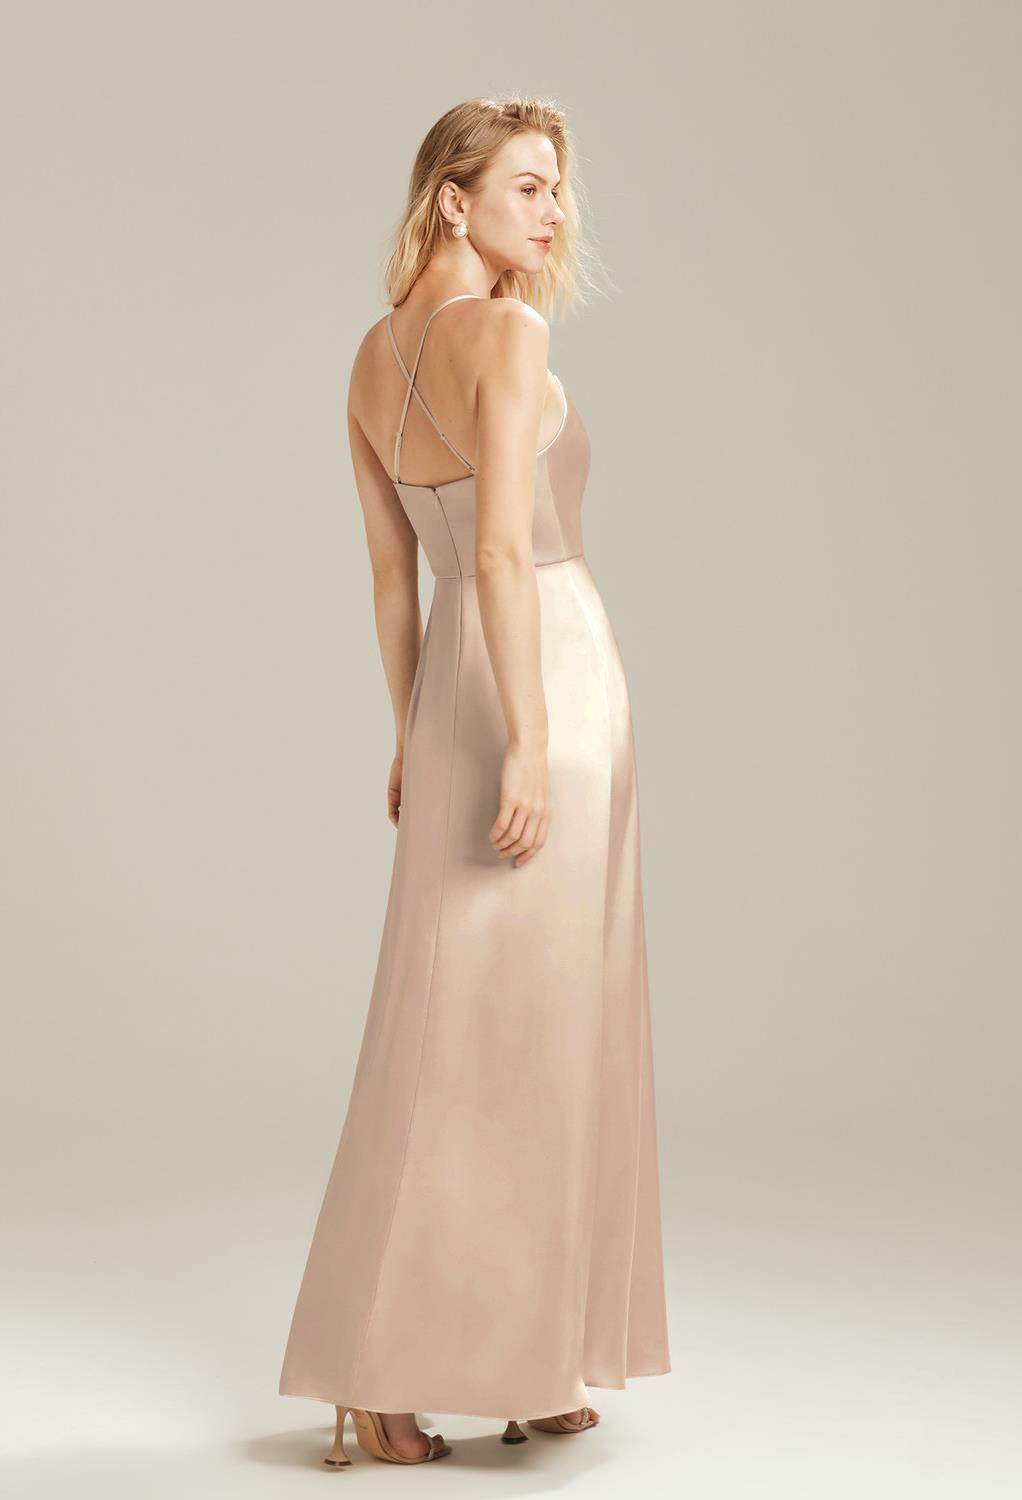 The view of a woman wearing a Kora - Satin Charmeuse Bridesmaid Dress - Off The Rack gown by Bergamot Bridal.